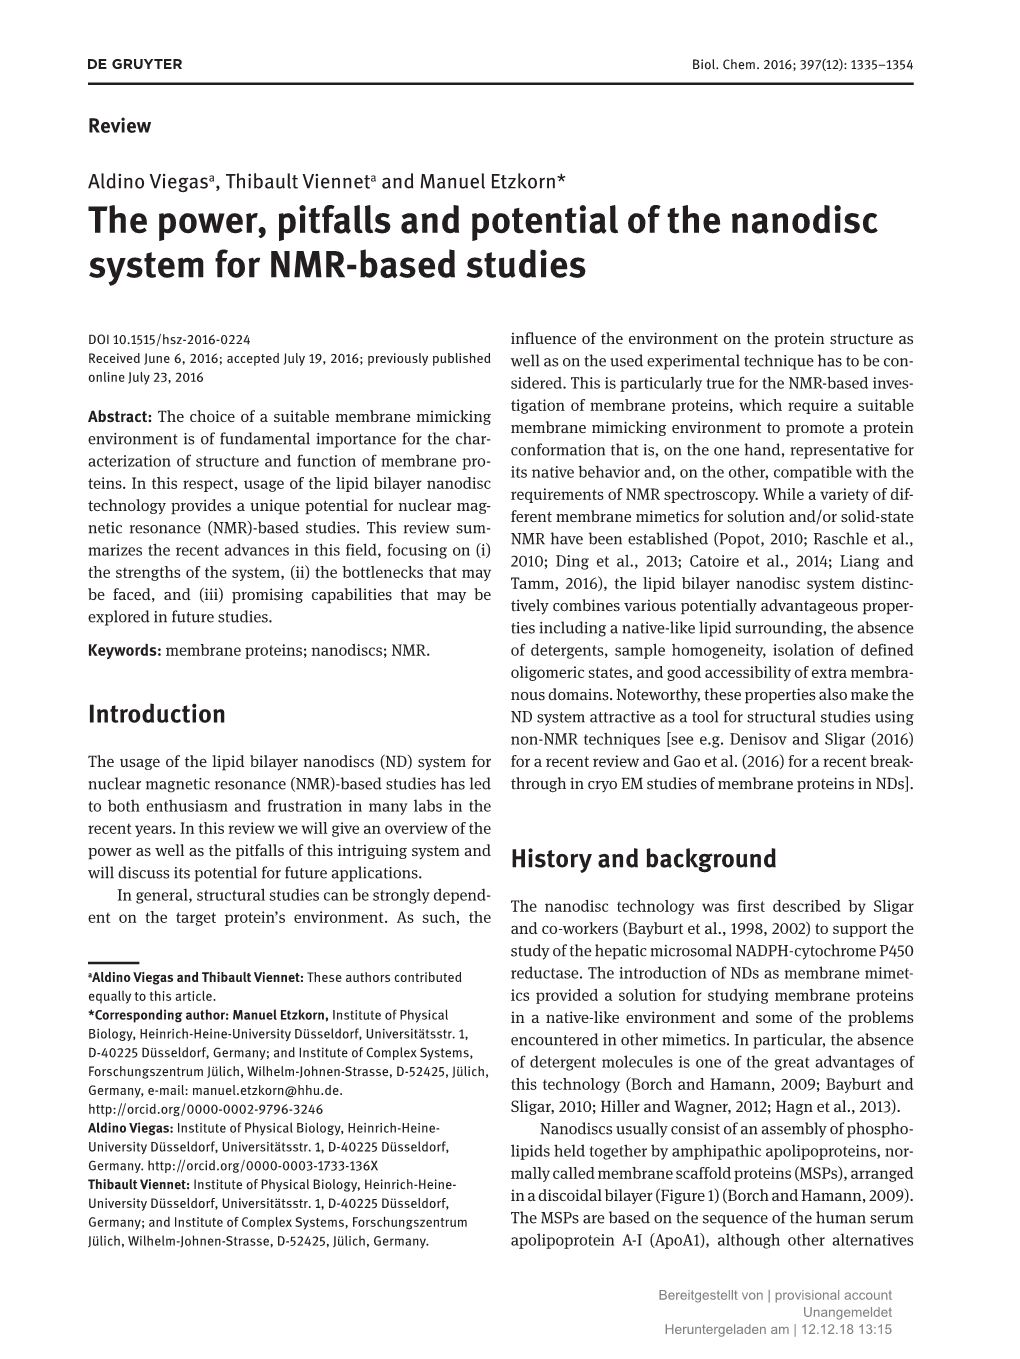 The Power, Pitfalls and Potential of the Nanodisc System for NMR-Based Studies